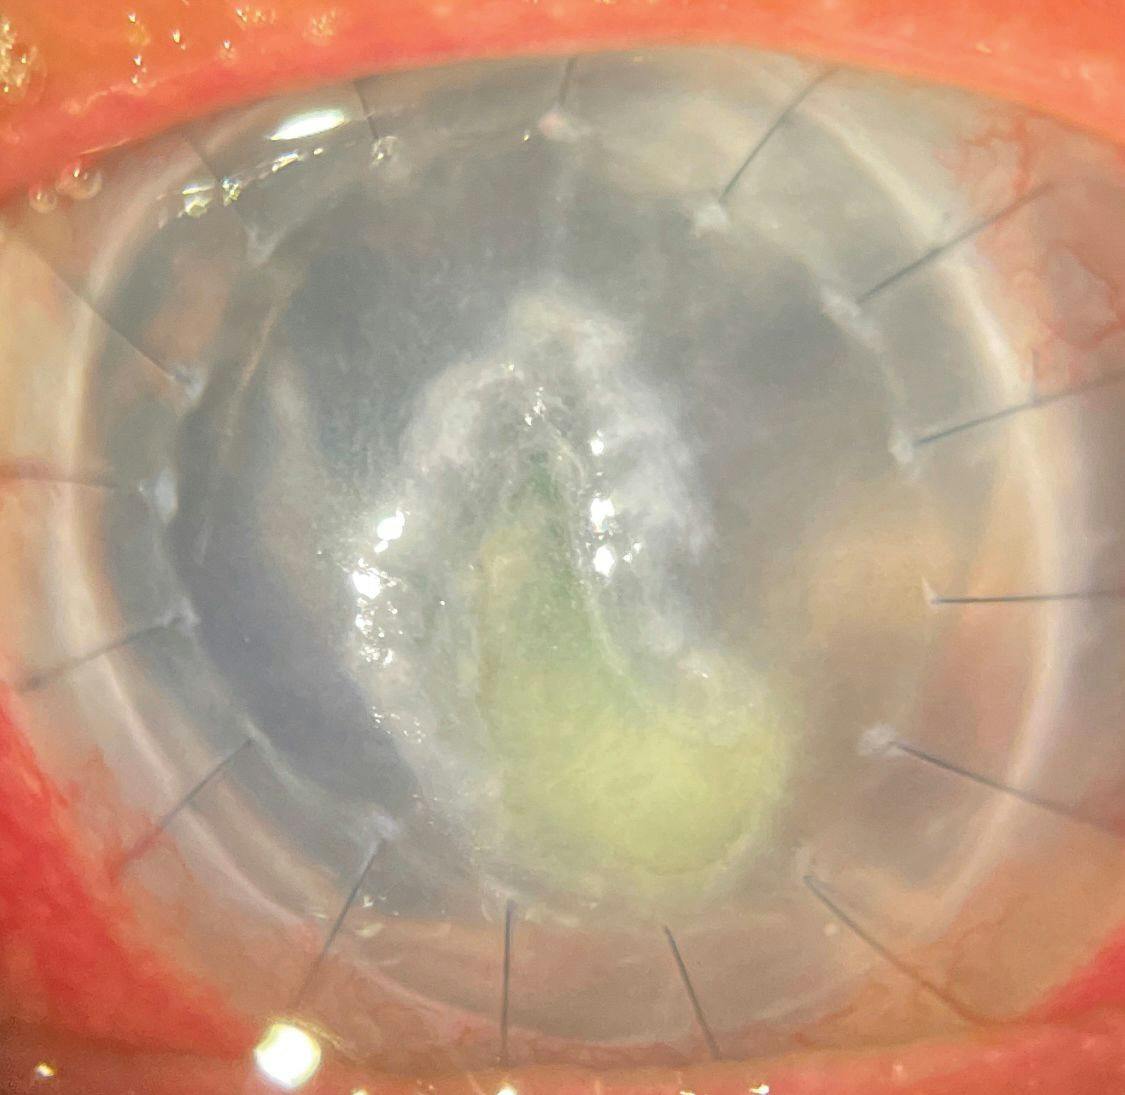 Figure 1. Large Corneal Abrasion. Patient aged 67 years with a previous corneal transplant exhibiting a large corneal abrasion.